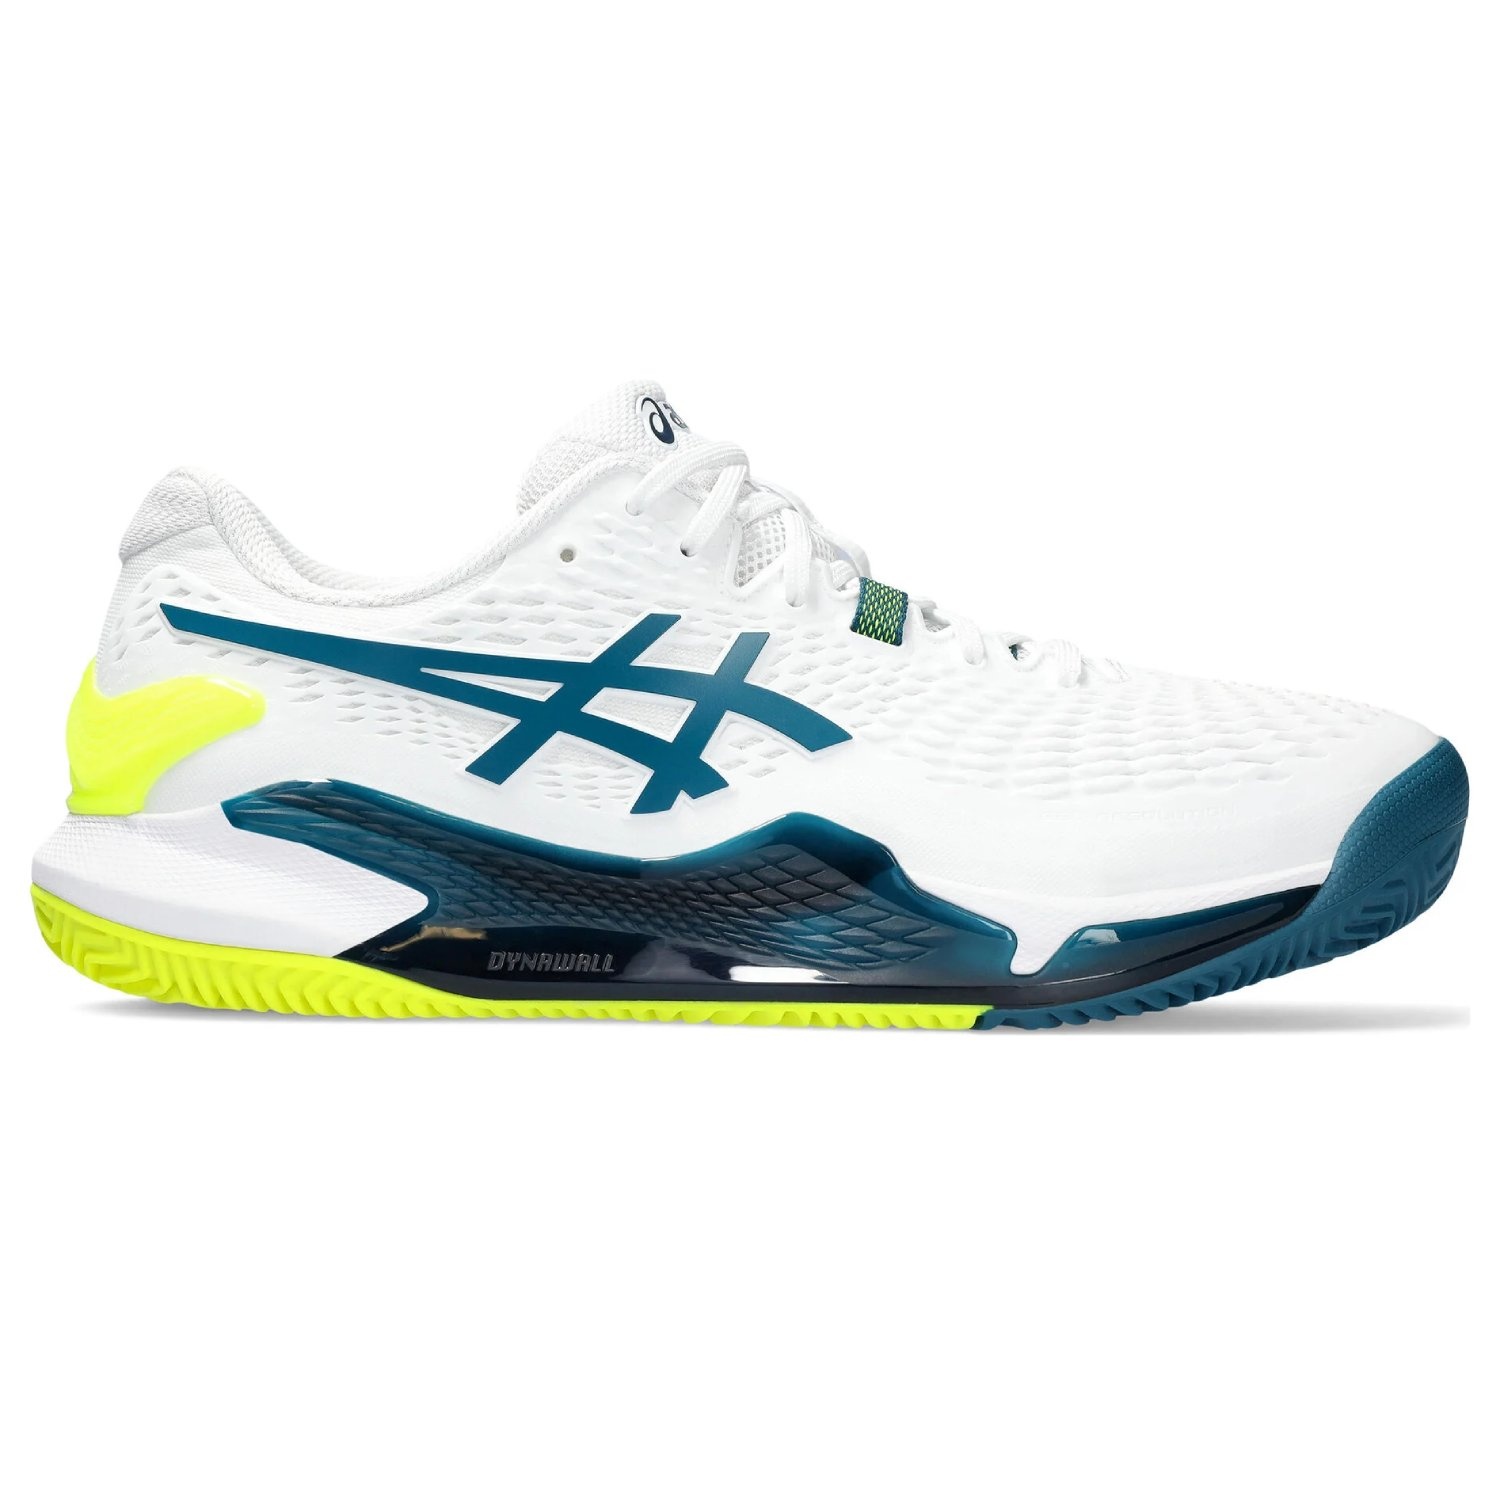 Asics Gel Resolution 9 Clay White/Restful Teal